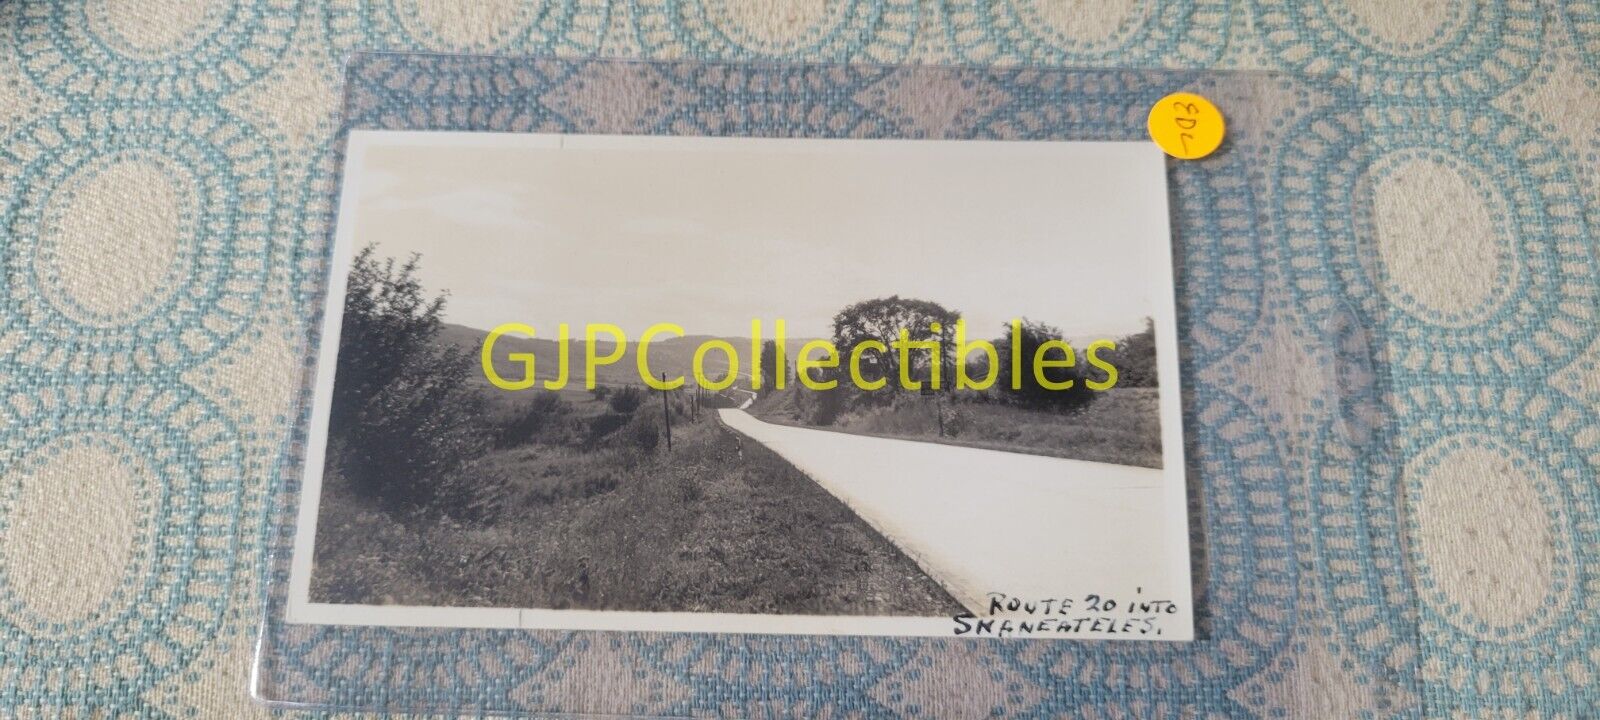 EDL VINTAGE PHOTOGRAPH Spencer Lionel Adams SKANEATELES NY ROUTE 20 SKANEATELES